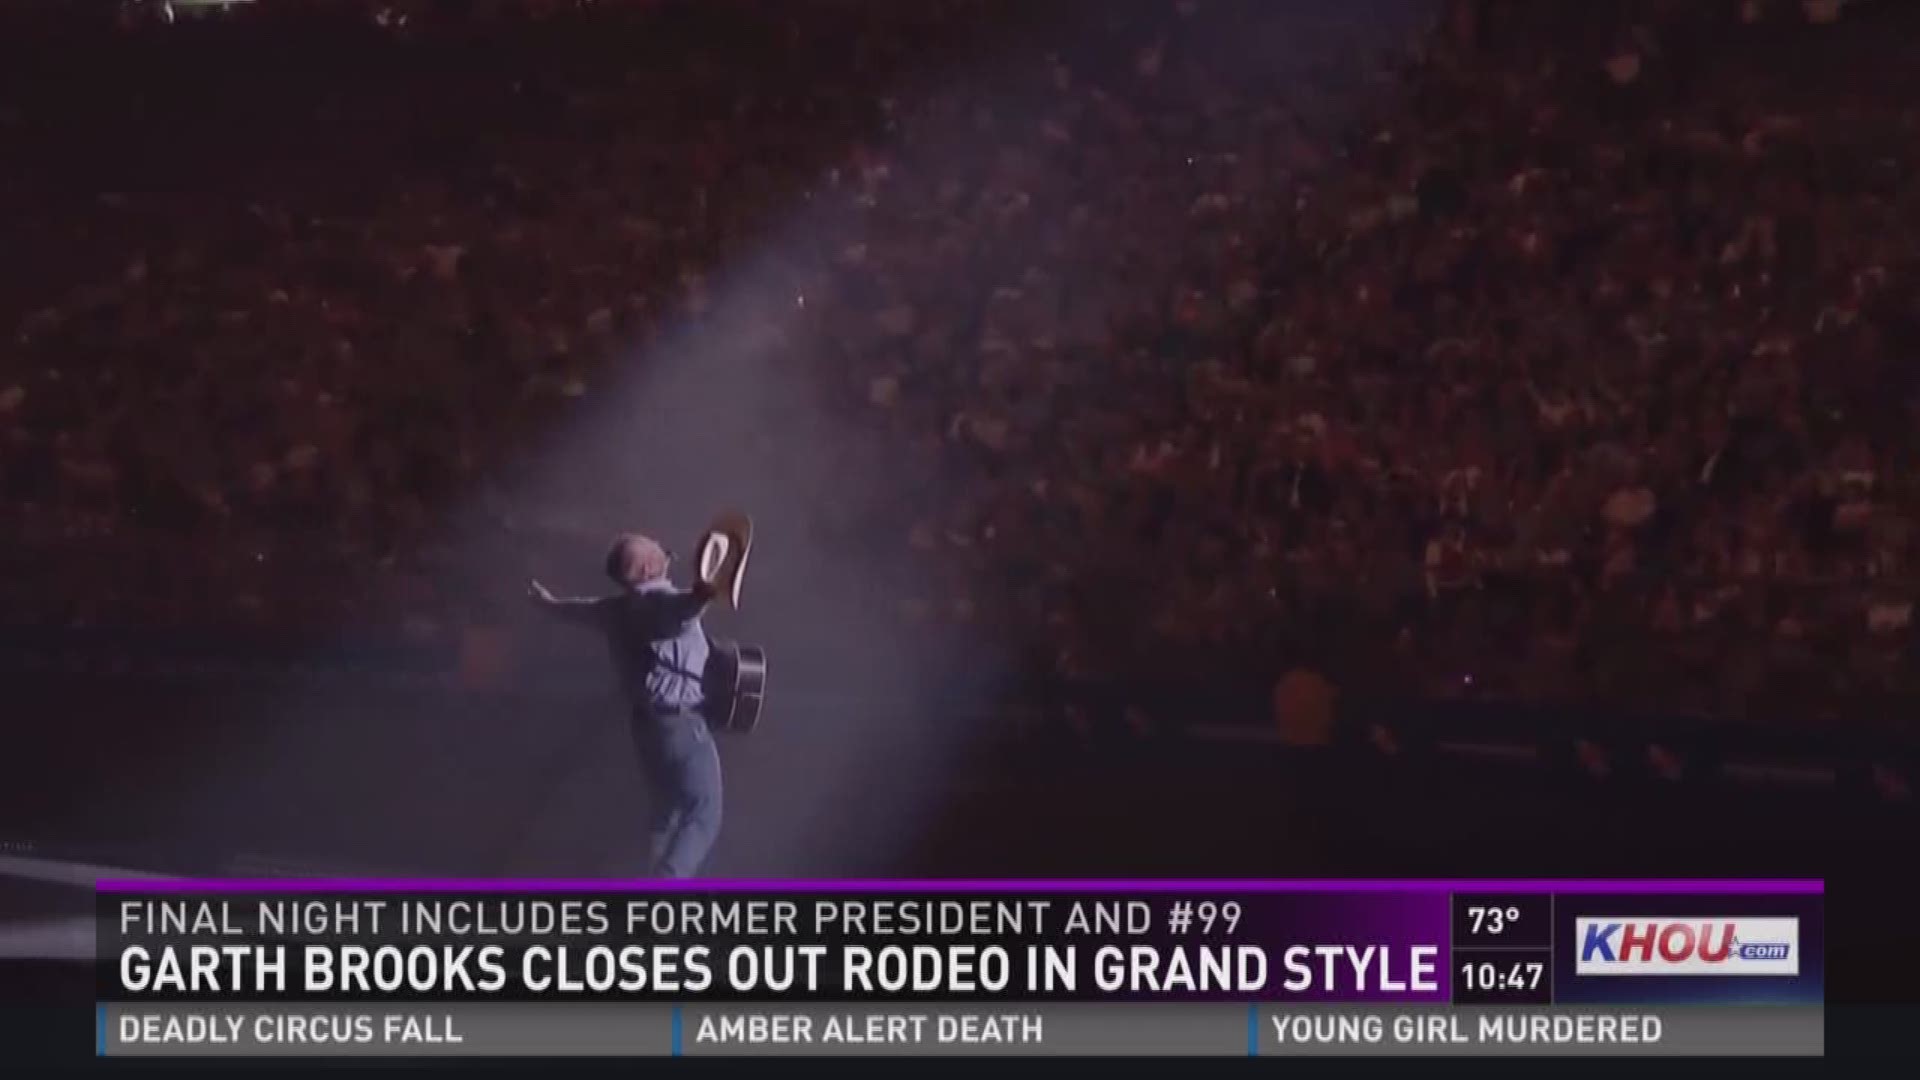 Country superstar Garth Brooks closed out the 2018 RodeoHouston season with a concert that had a record breaking attendance. 